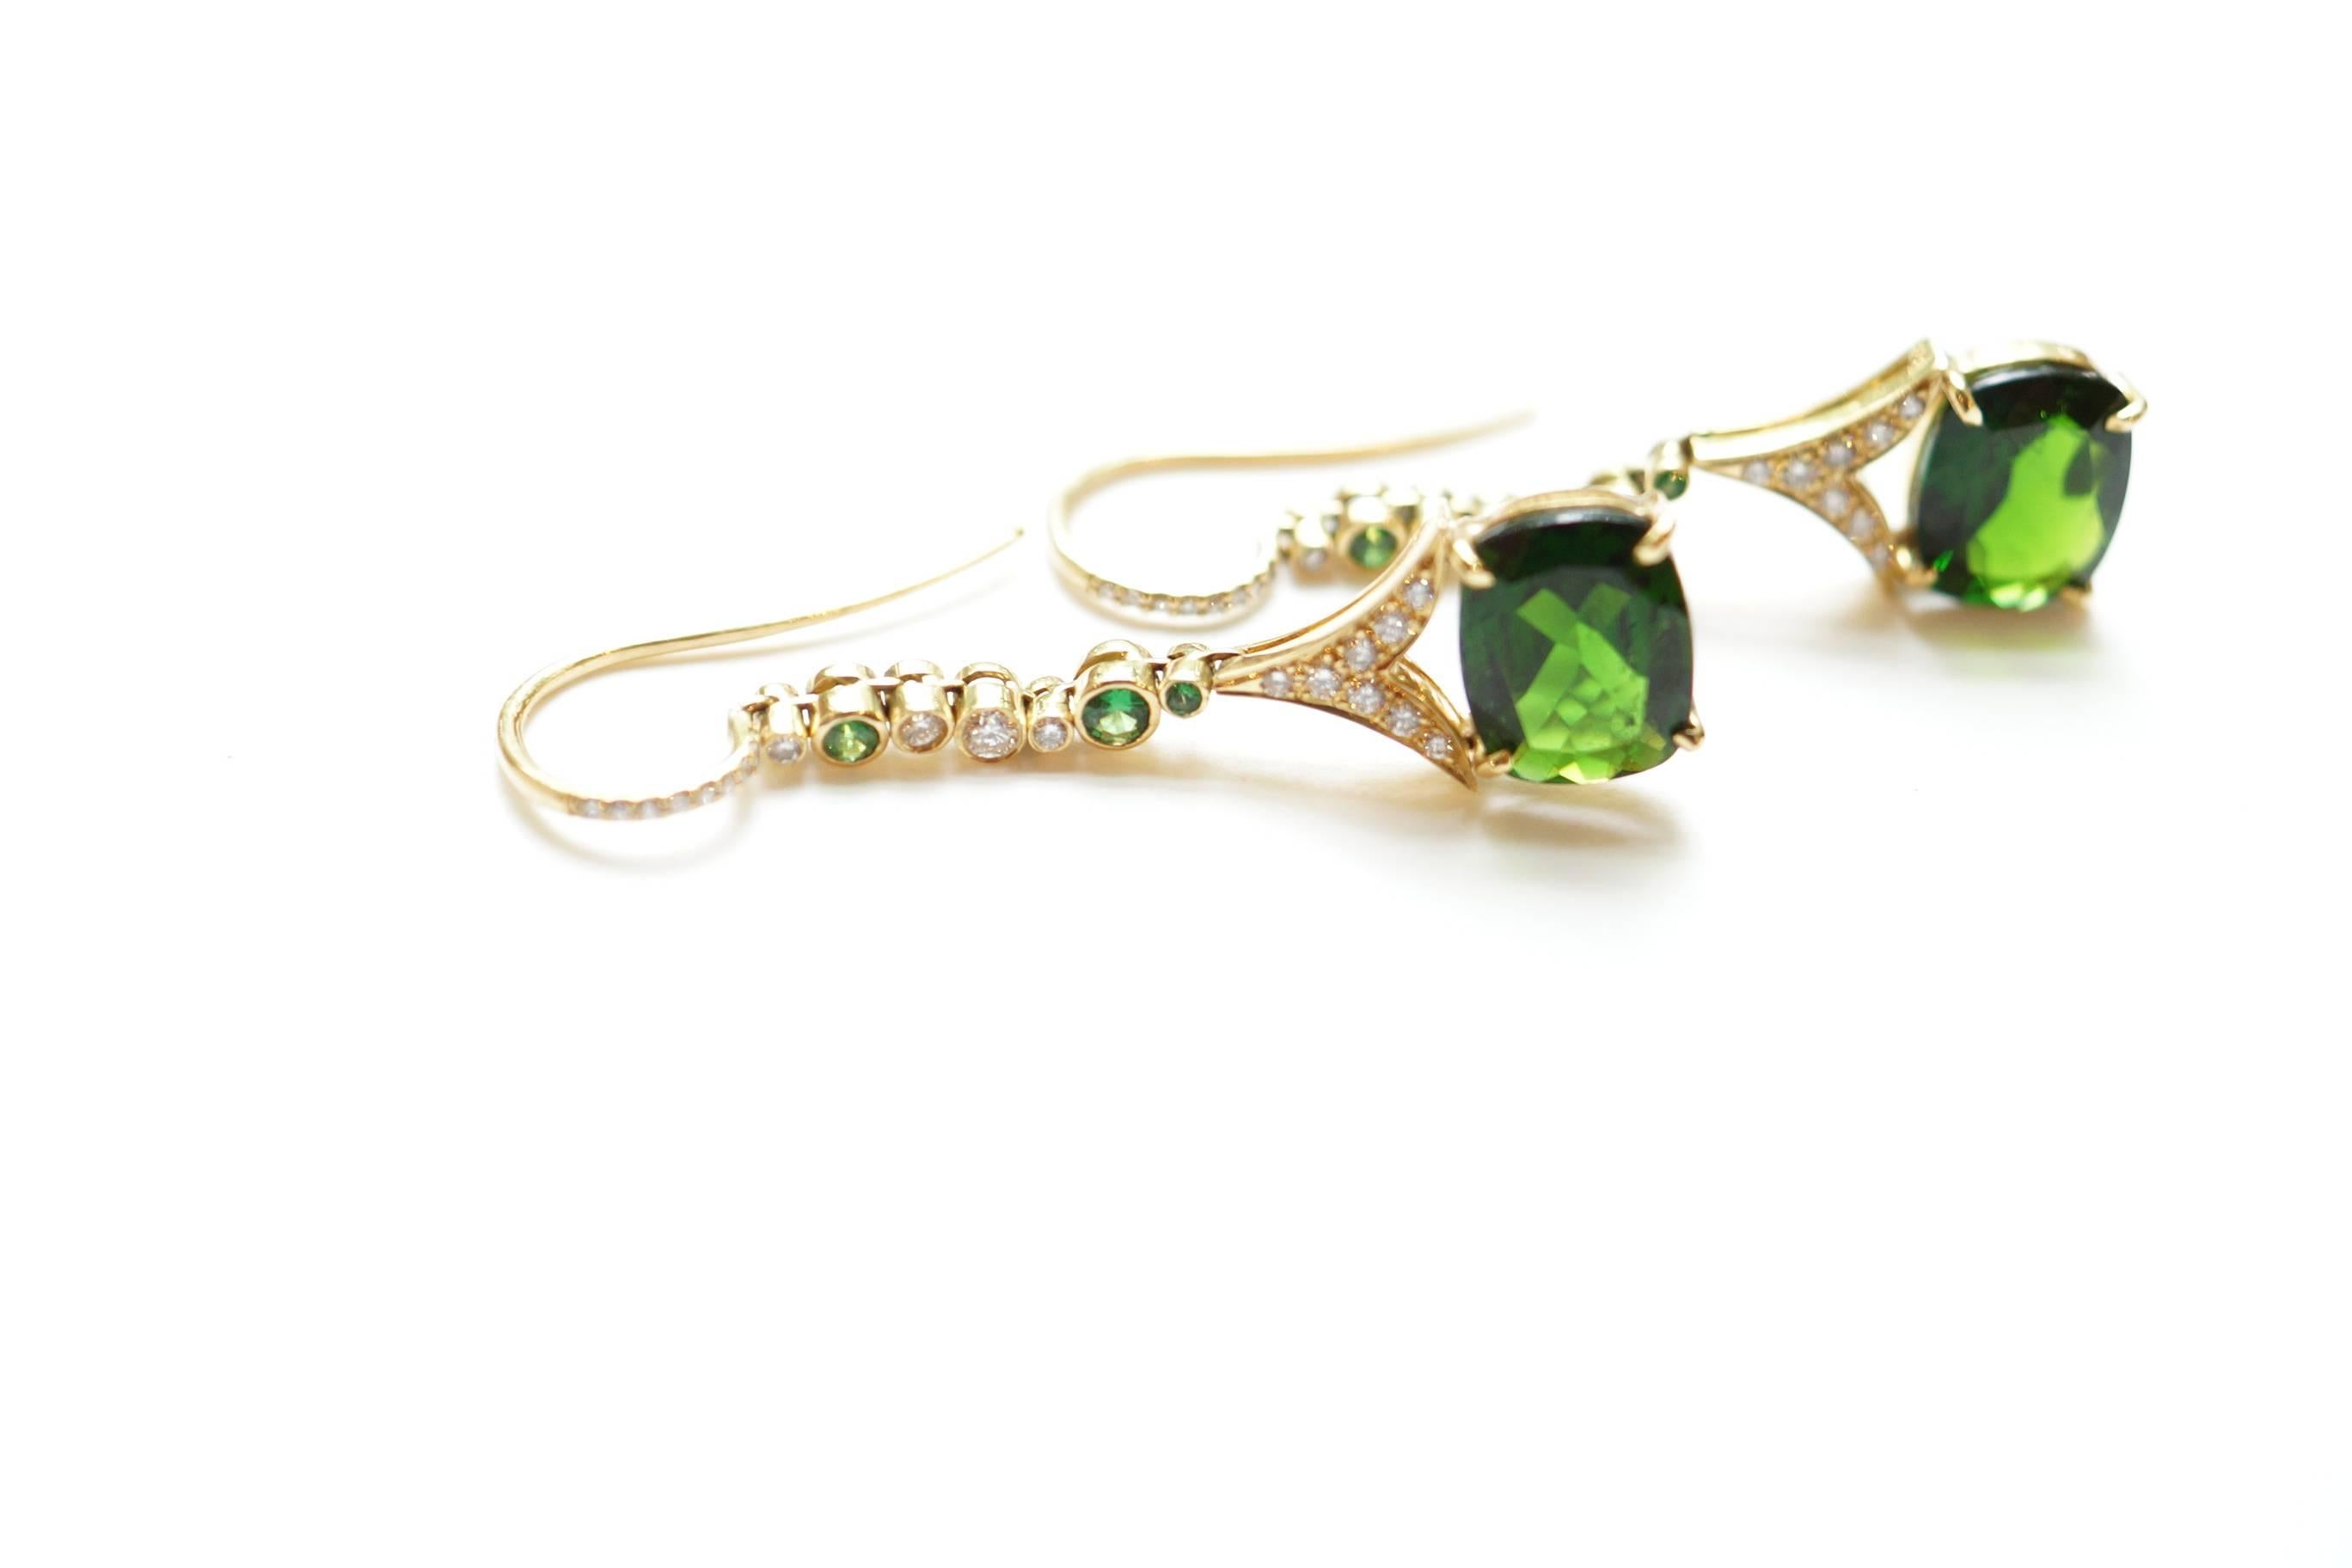 Lassa Eardrops
A pair of eighteen-karat yellow gold earpendants, showcasing a beautiful pair of rectangular emerald-cut chrome diopsides.  Suspended from each white diamond-encrusted earwire is a vertical line of sporadically placed tsavorite